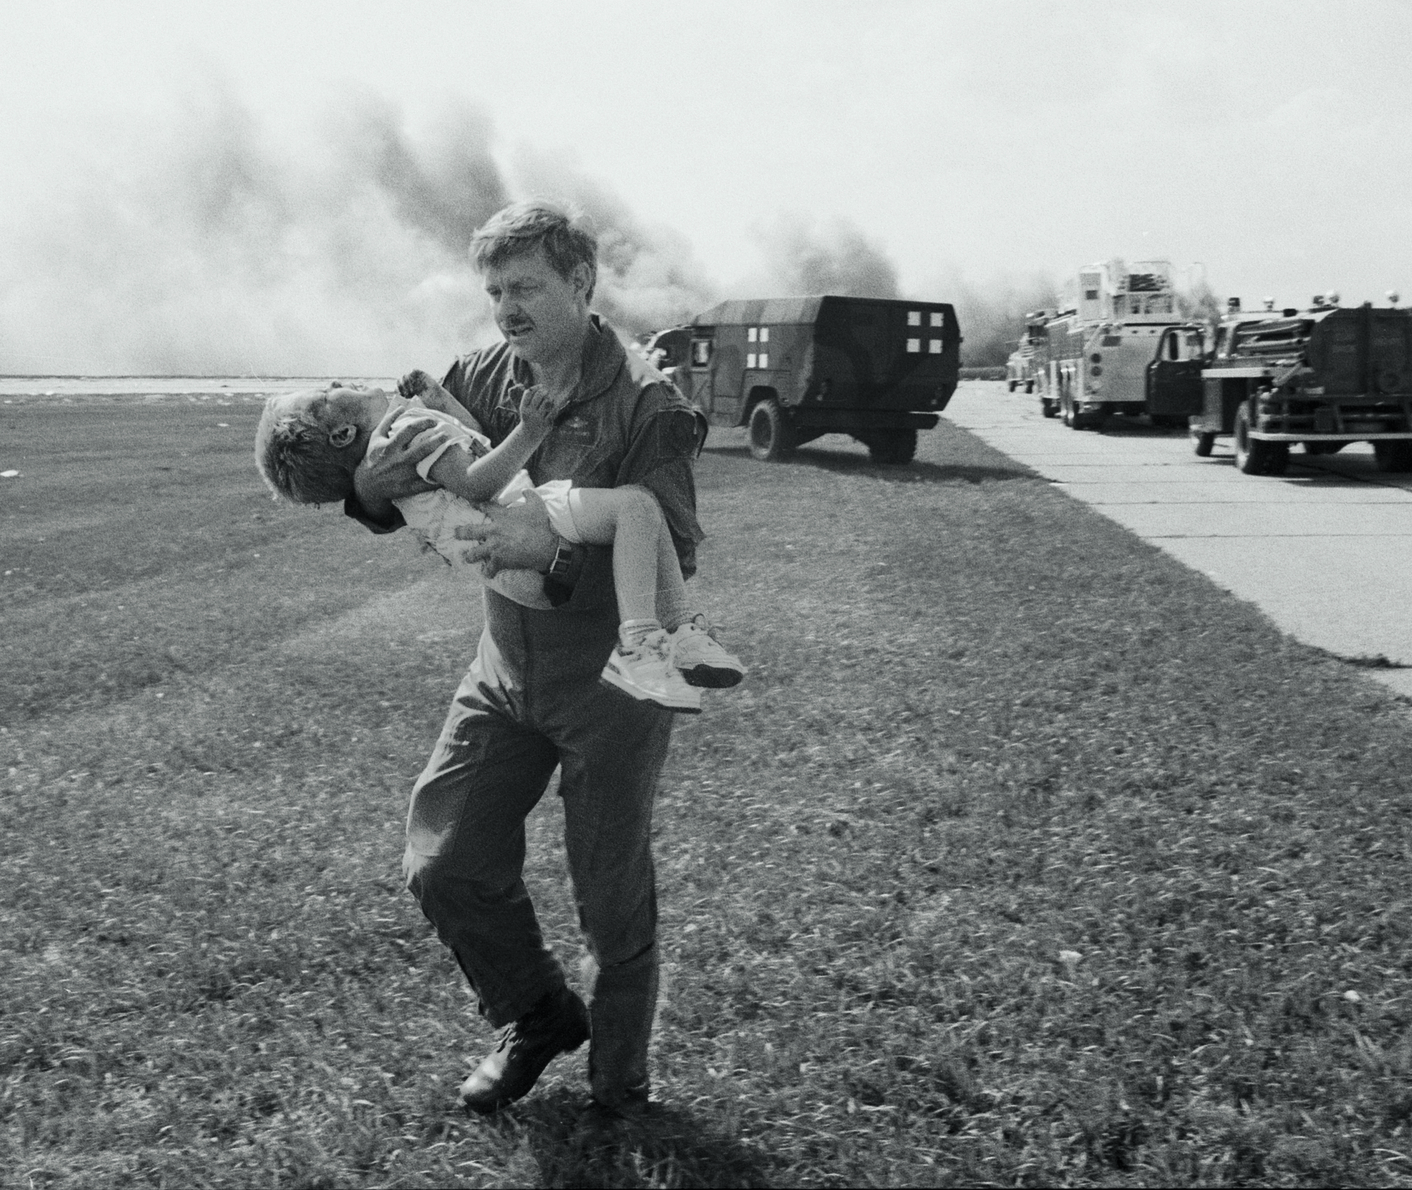 Spencer Bailey being carried after the 1989 crash-landing of United Flight 232 in Sioux City, Iowa, USA